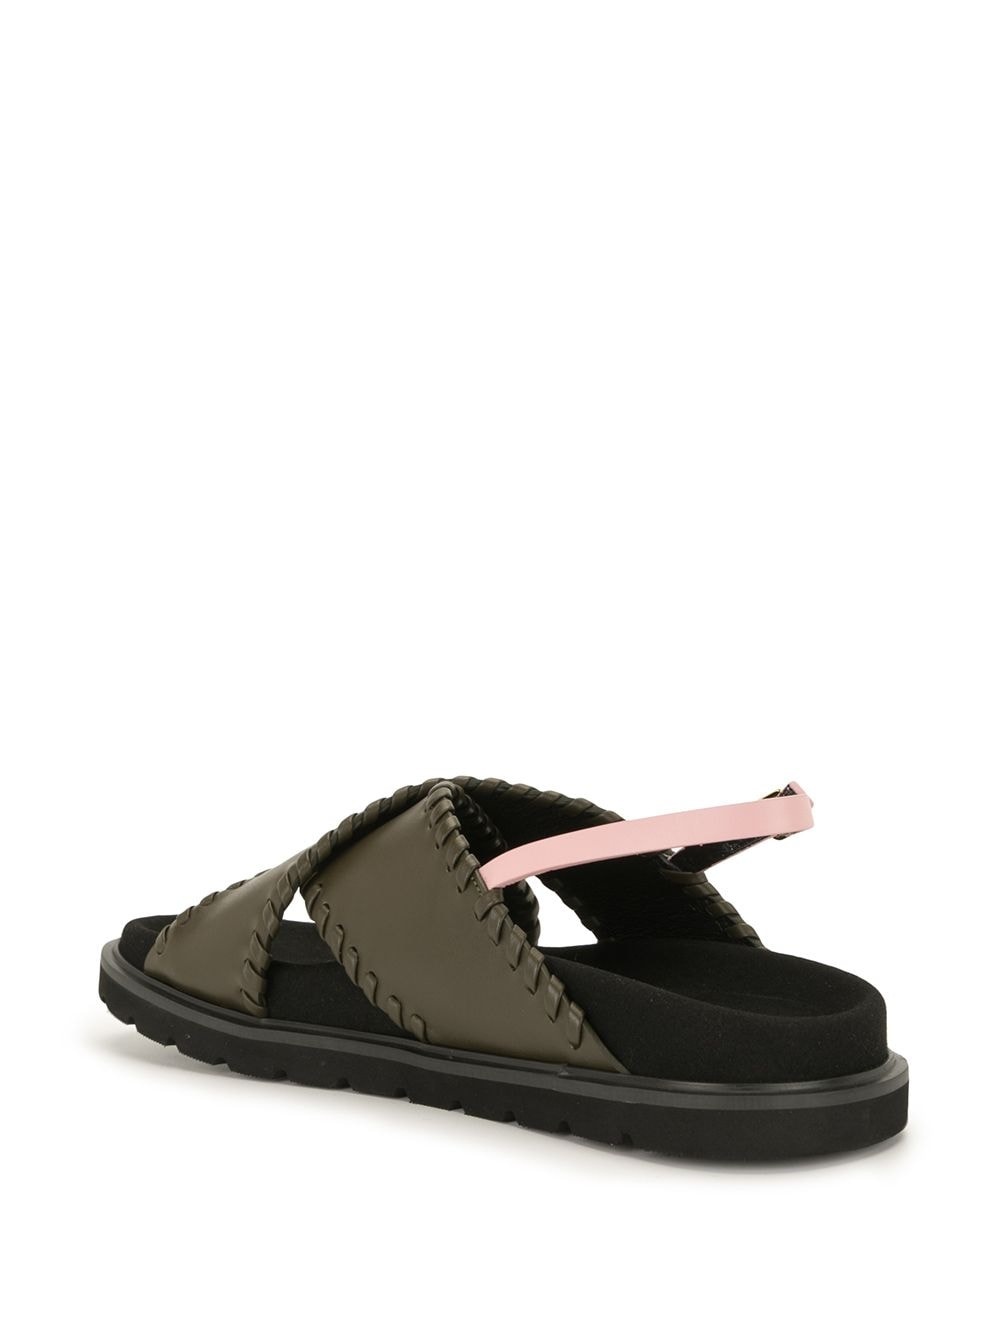 leather crossover sandals - 3